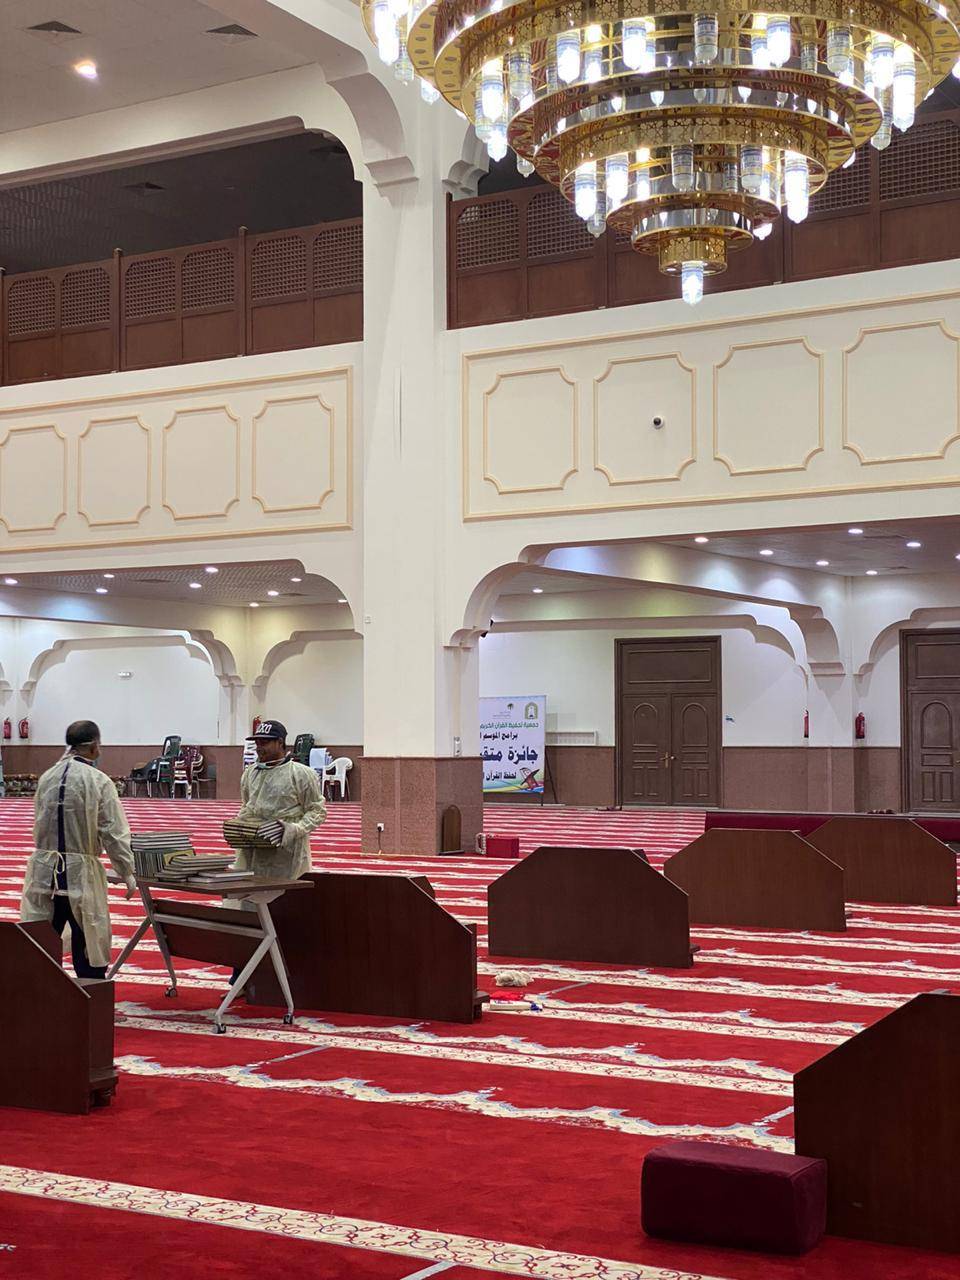 Over 90,000 mosques to reopen on Sunday after sanitization